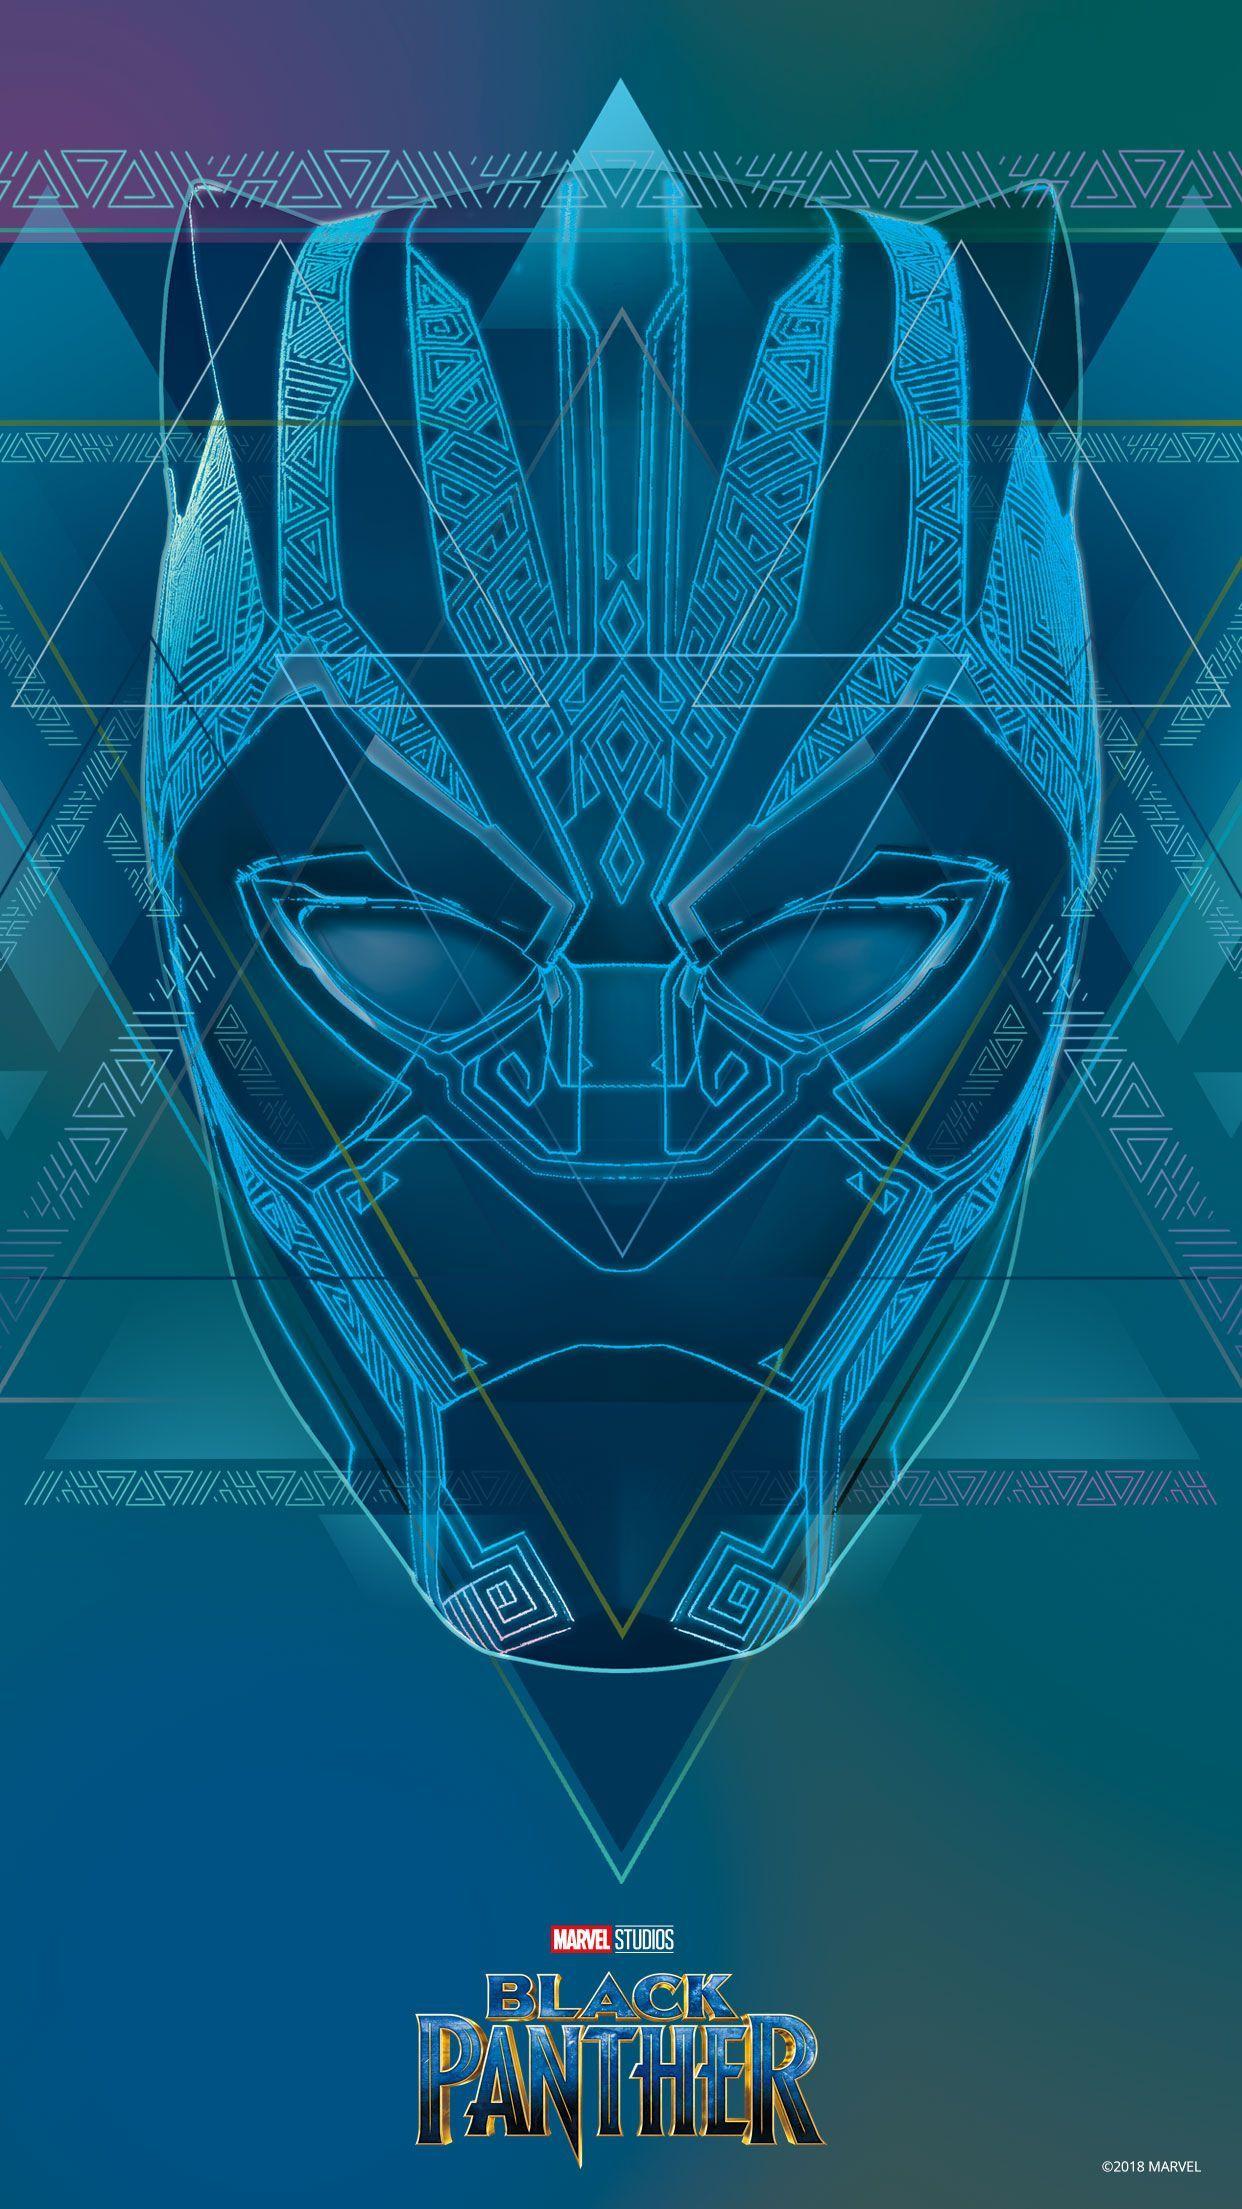 Keep it slick with these Black Panther mobile wallpaper. Random